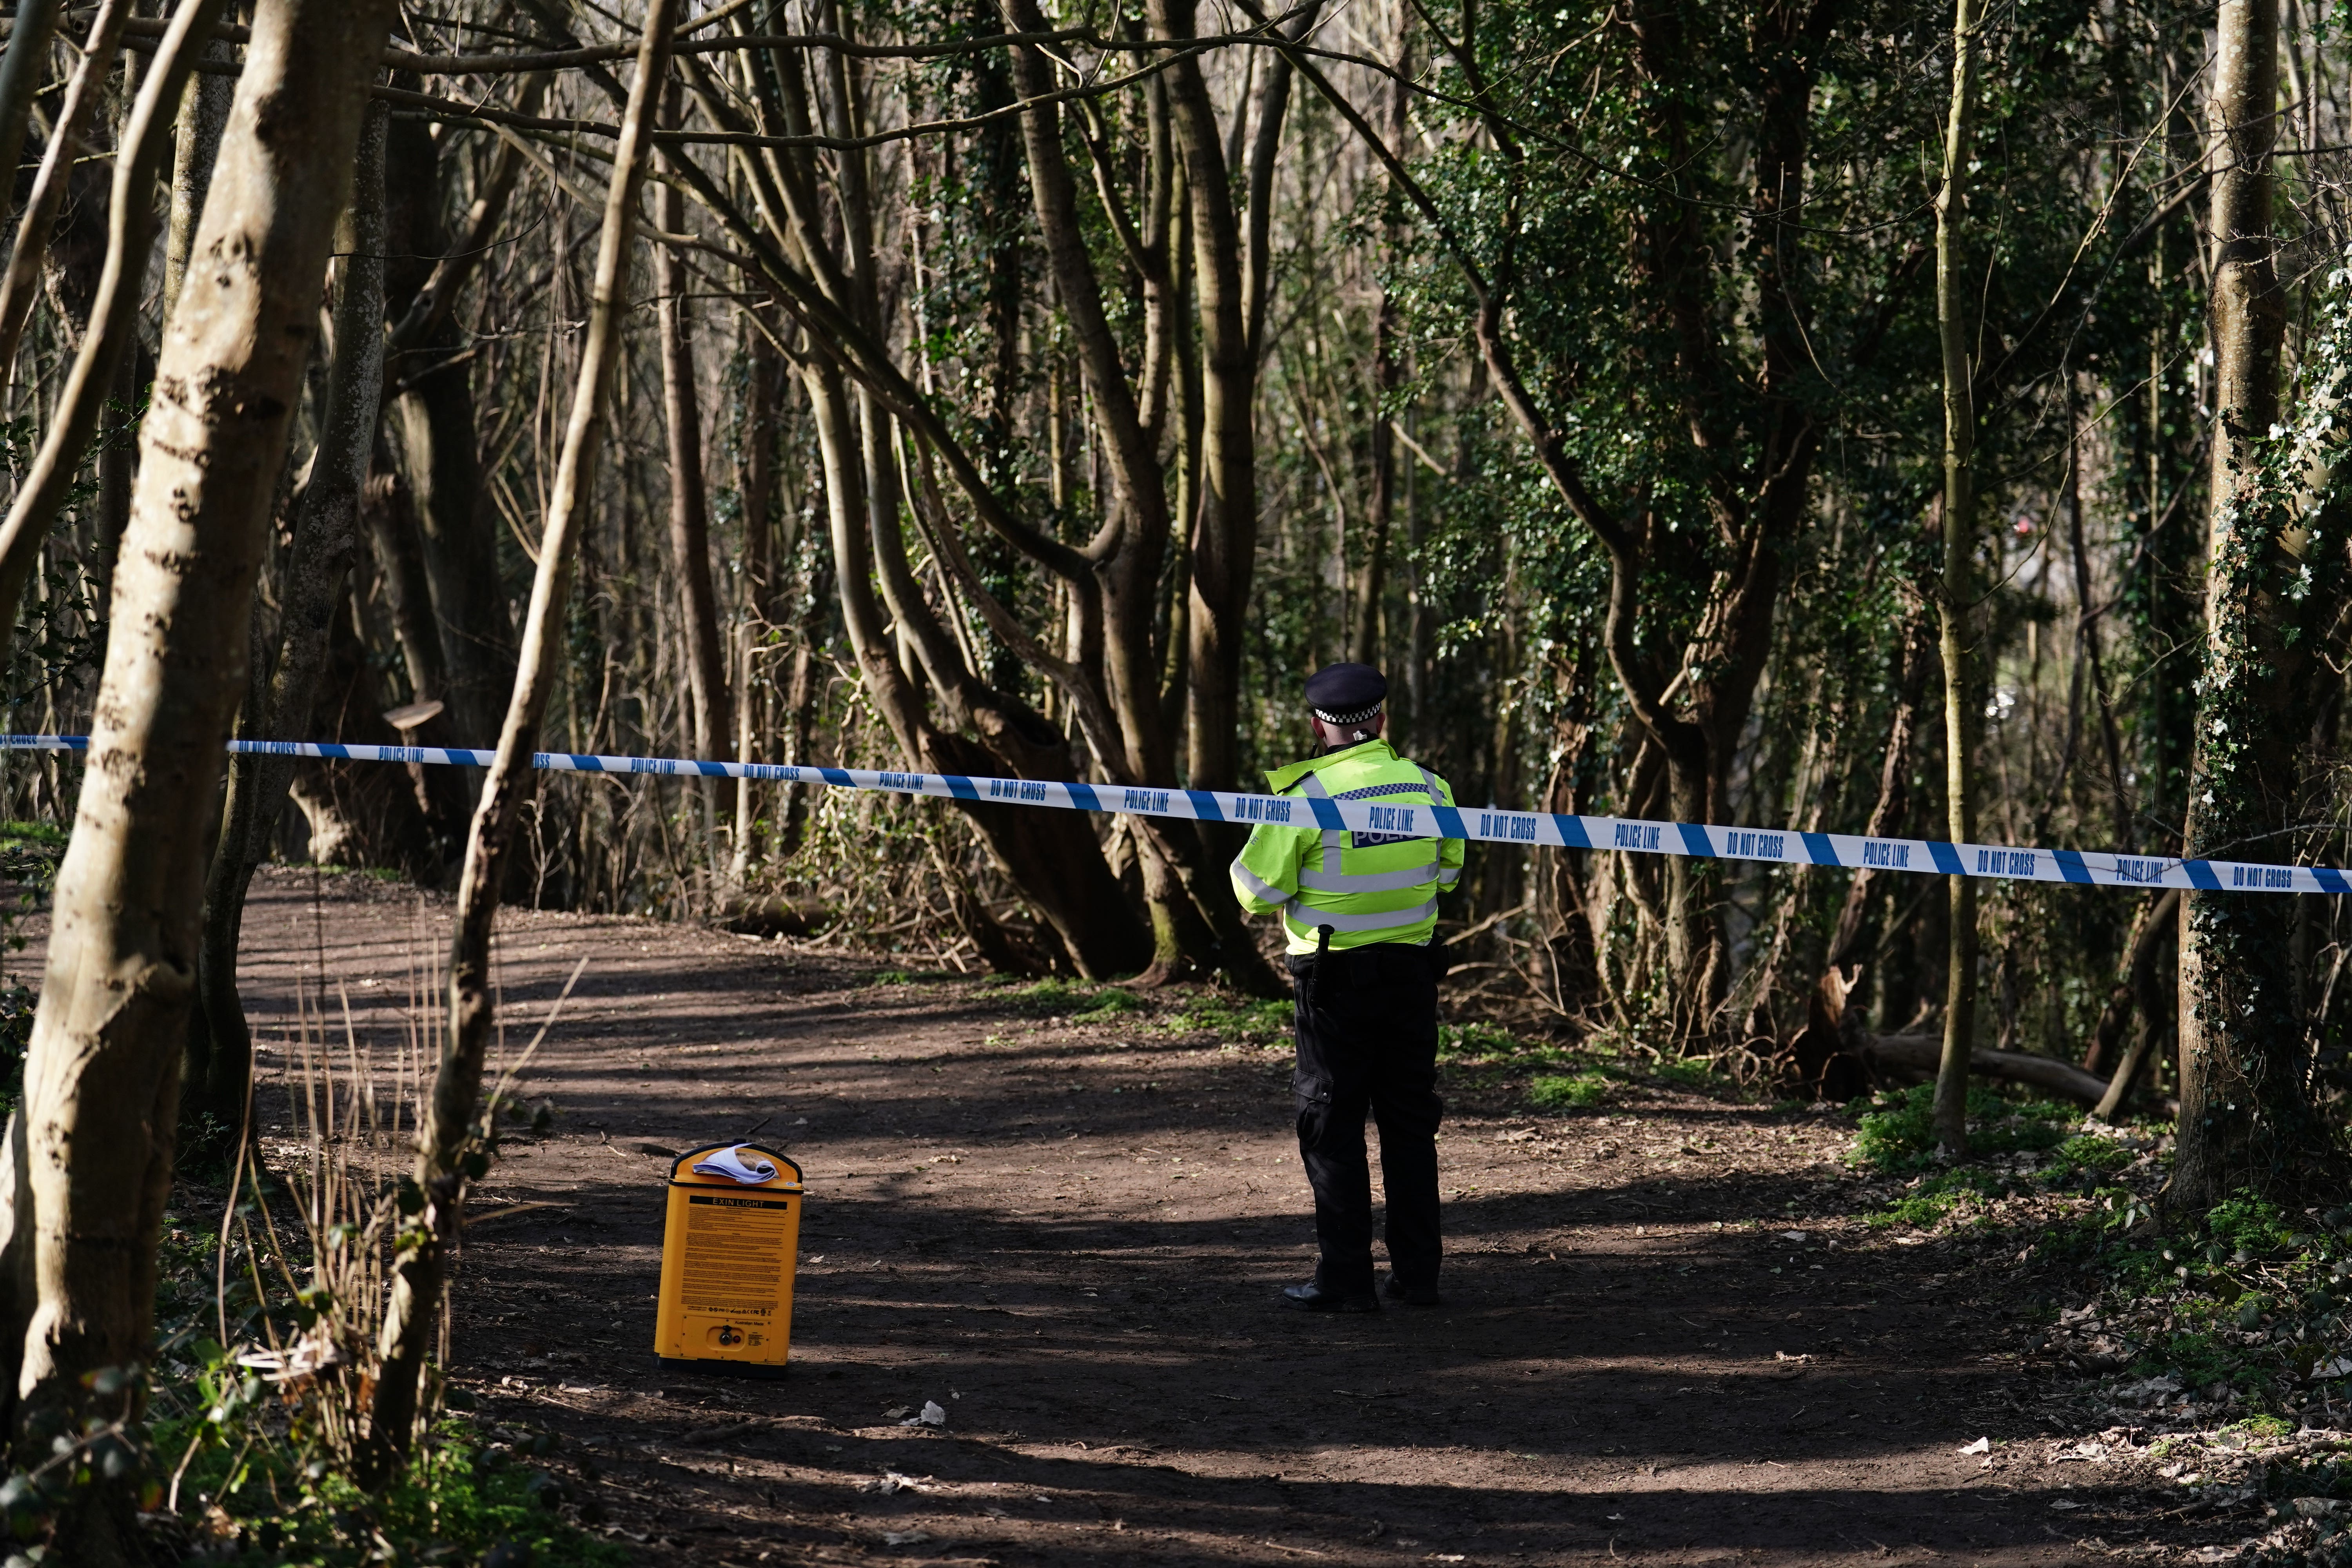 The girl’s remains were found after a nationwide appeal for their whereabouts